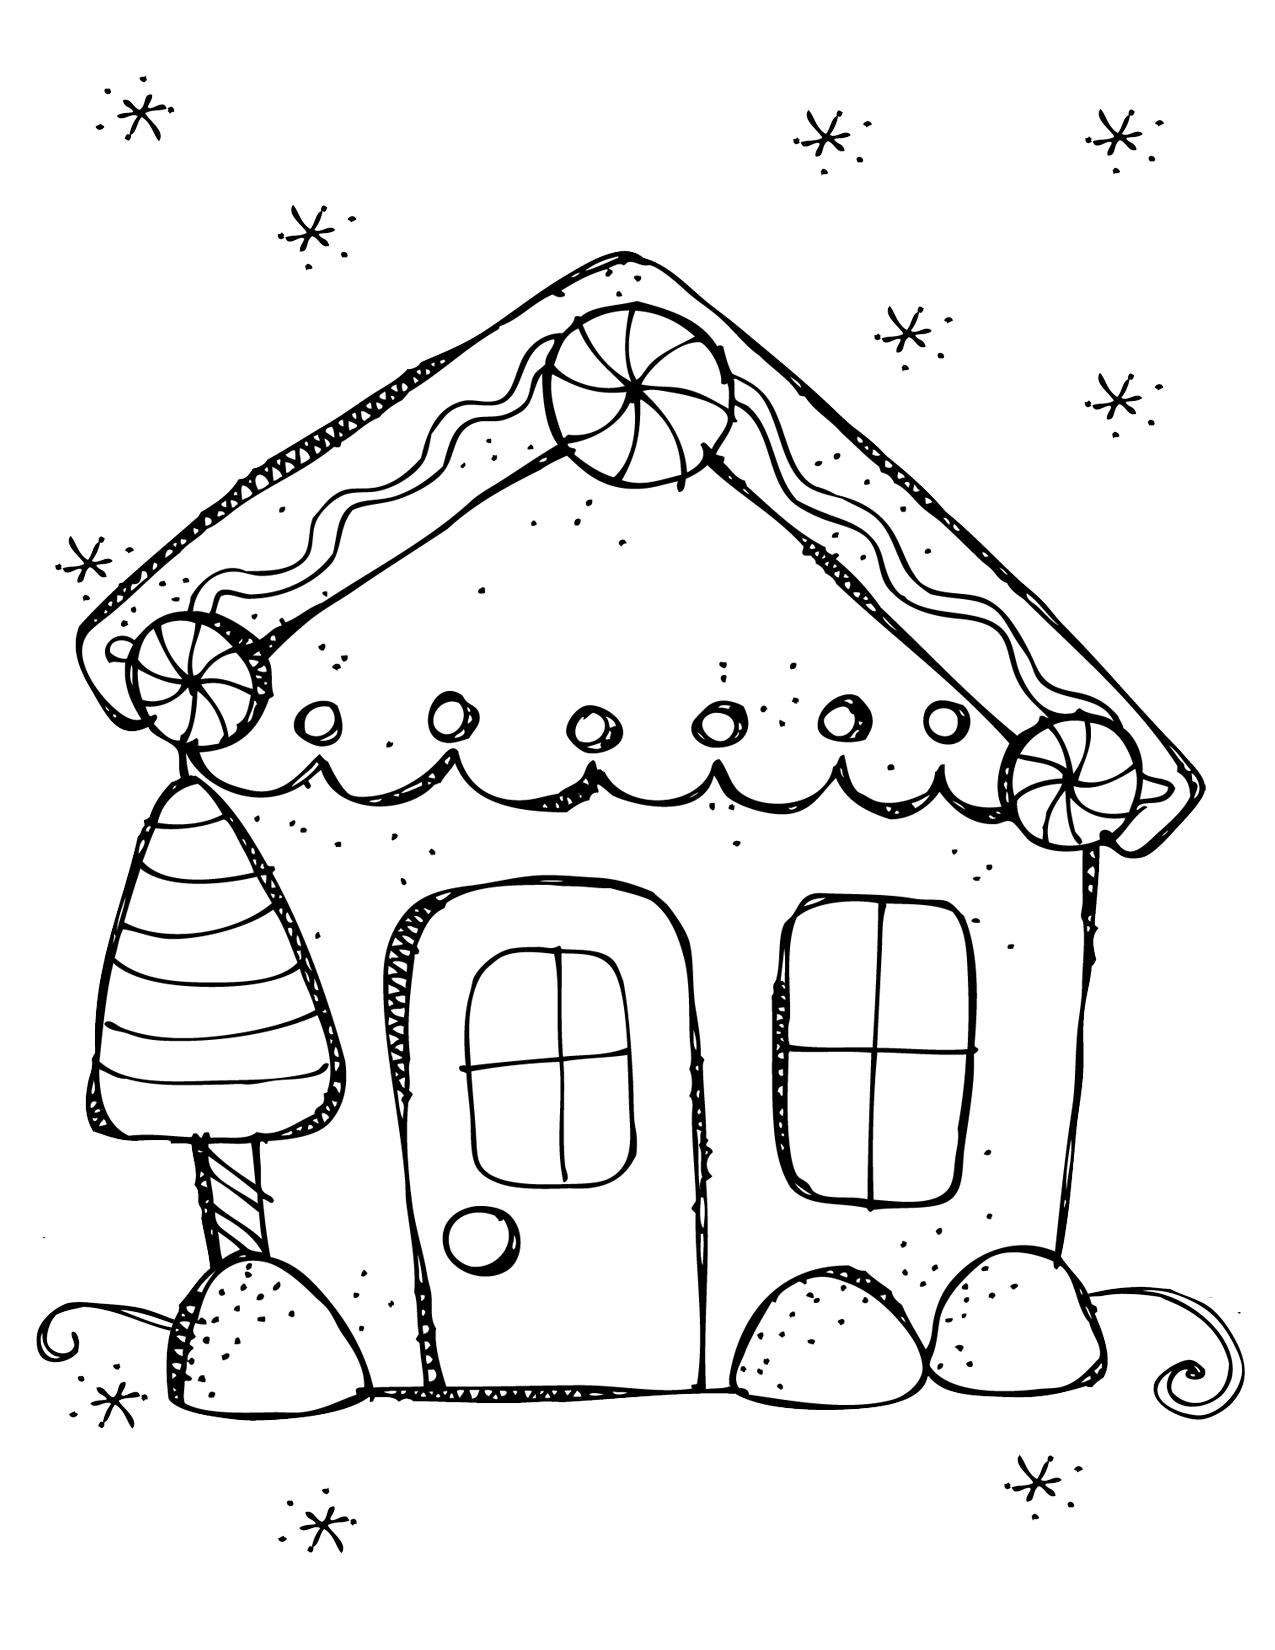 Startling Whoville Houses Coloring Gingerbread Man Coloring Page Snowflake Coloring Pages Candy Coloring Pages